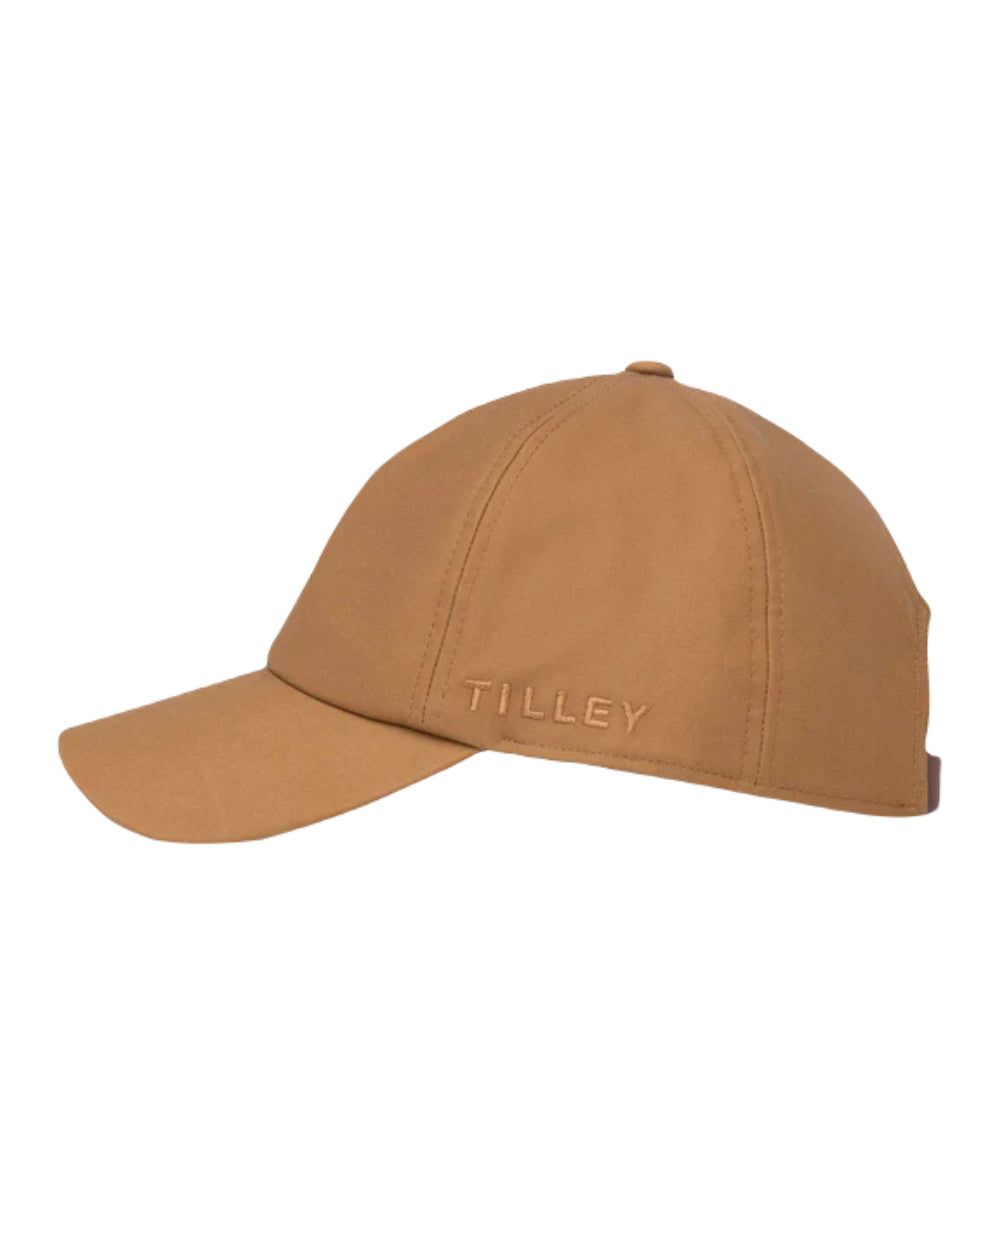 British Tan Coloured Tilley Hats Waxed Baseball Cap On A White Background 